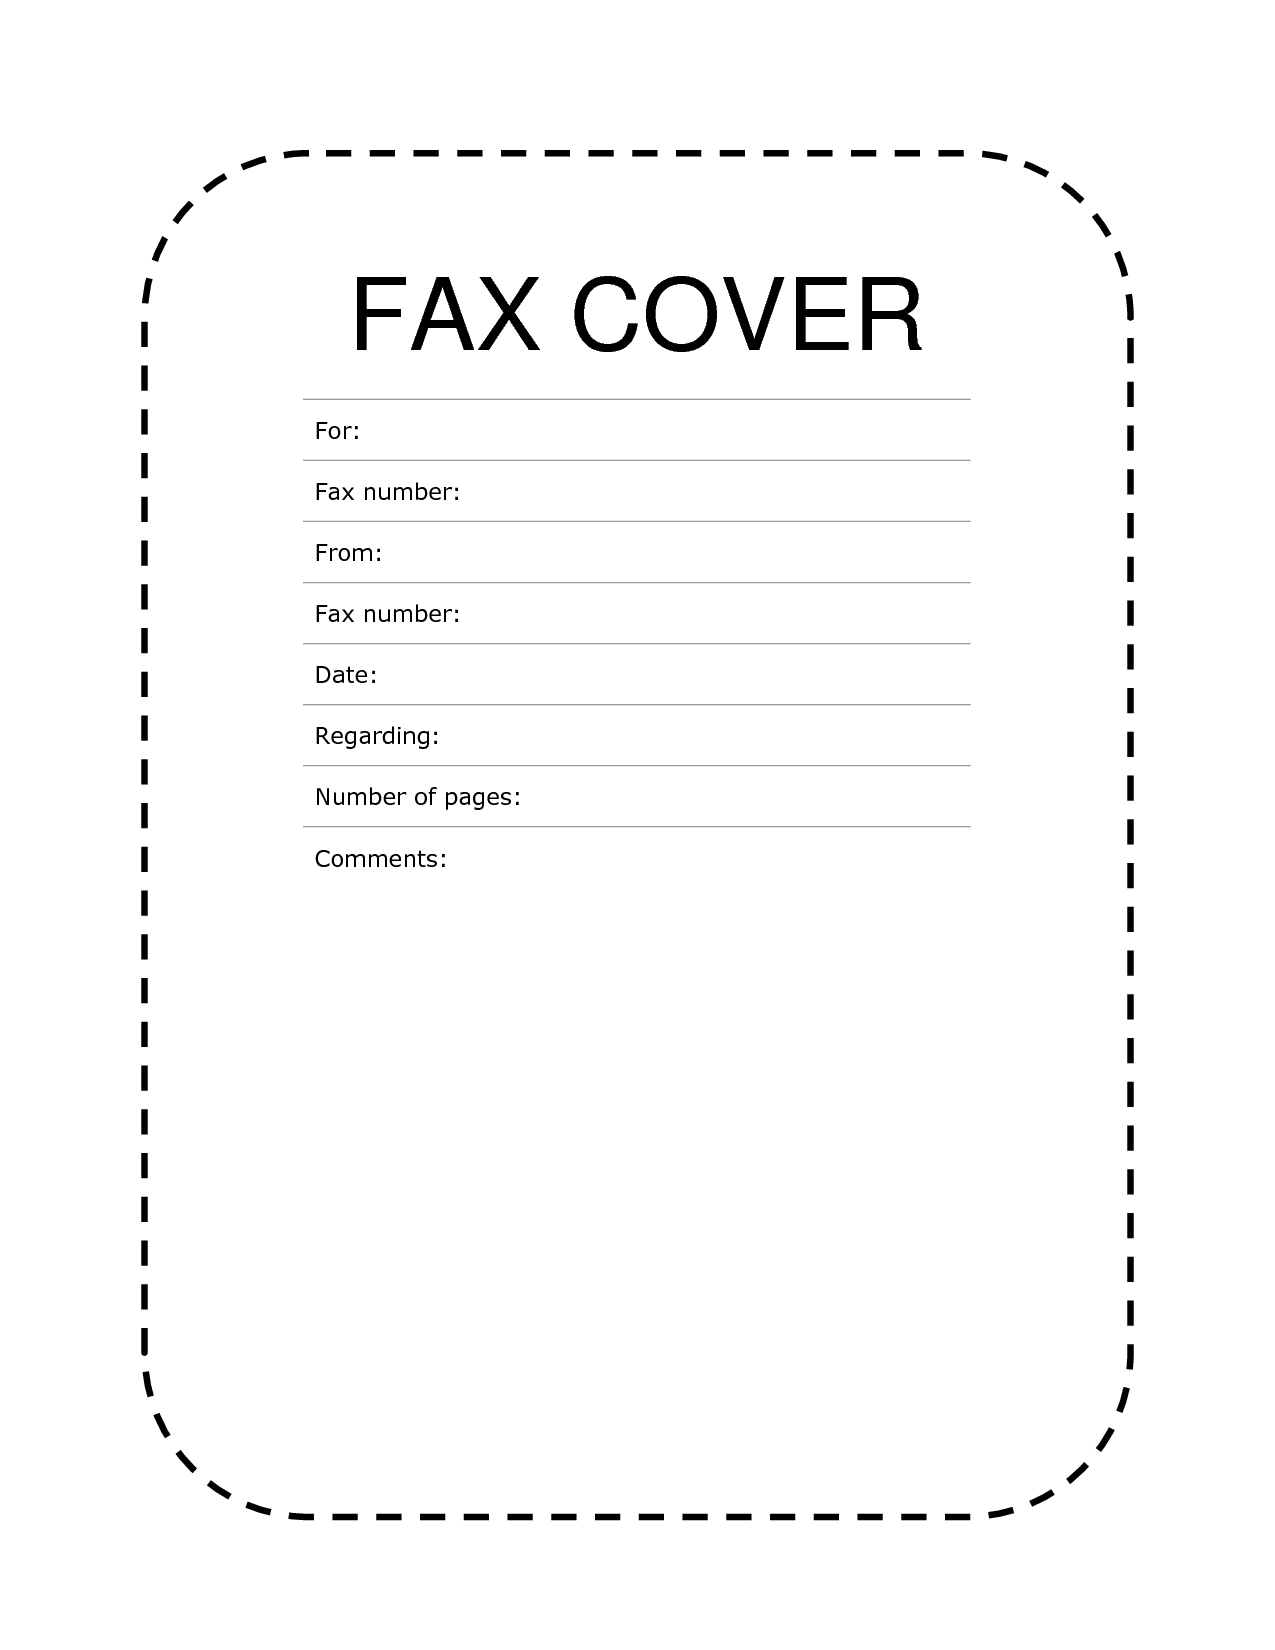 Free Fax Cover Sheet Template Format Example Pdf Printable | Fax - Free Printable Fax Cover Sheet